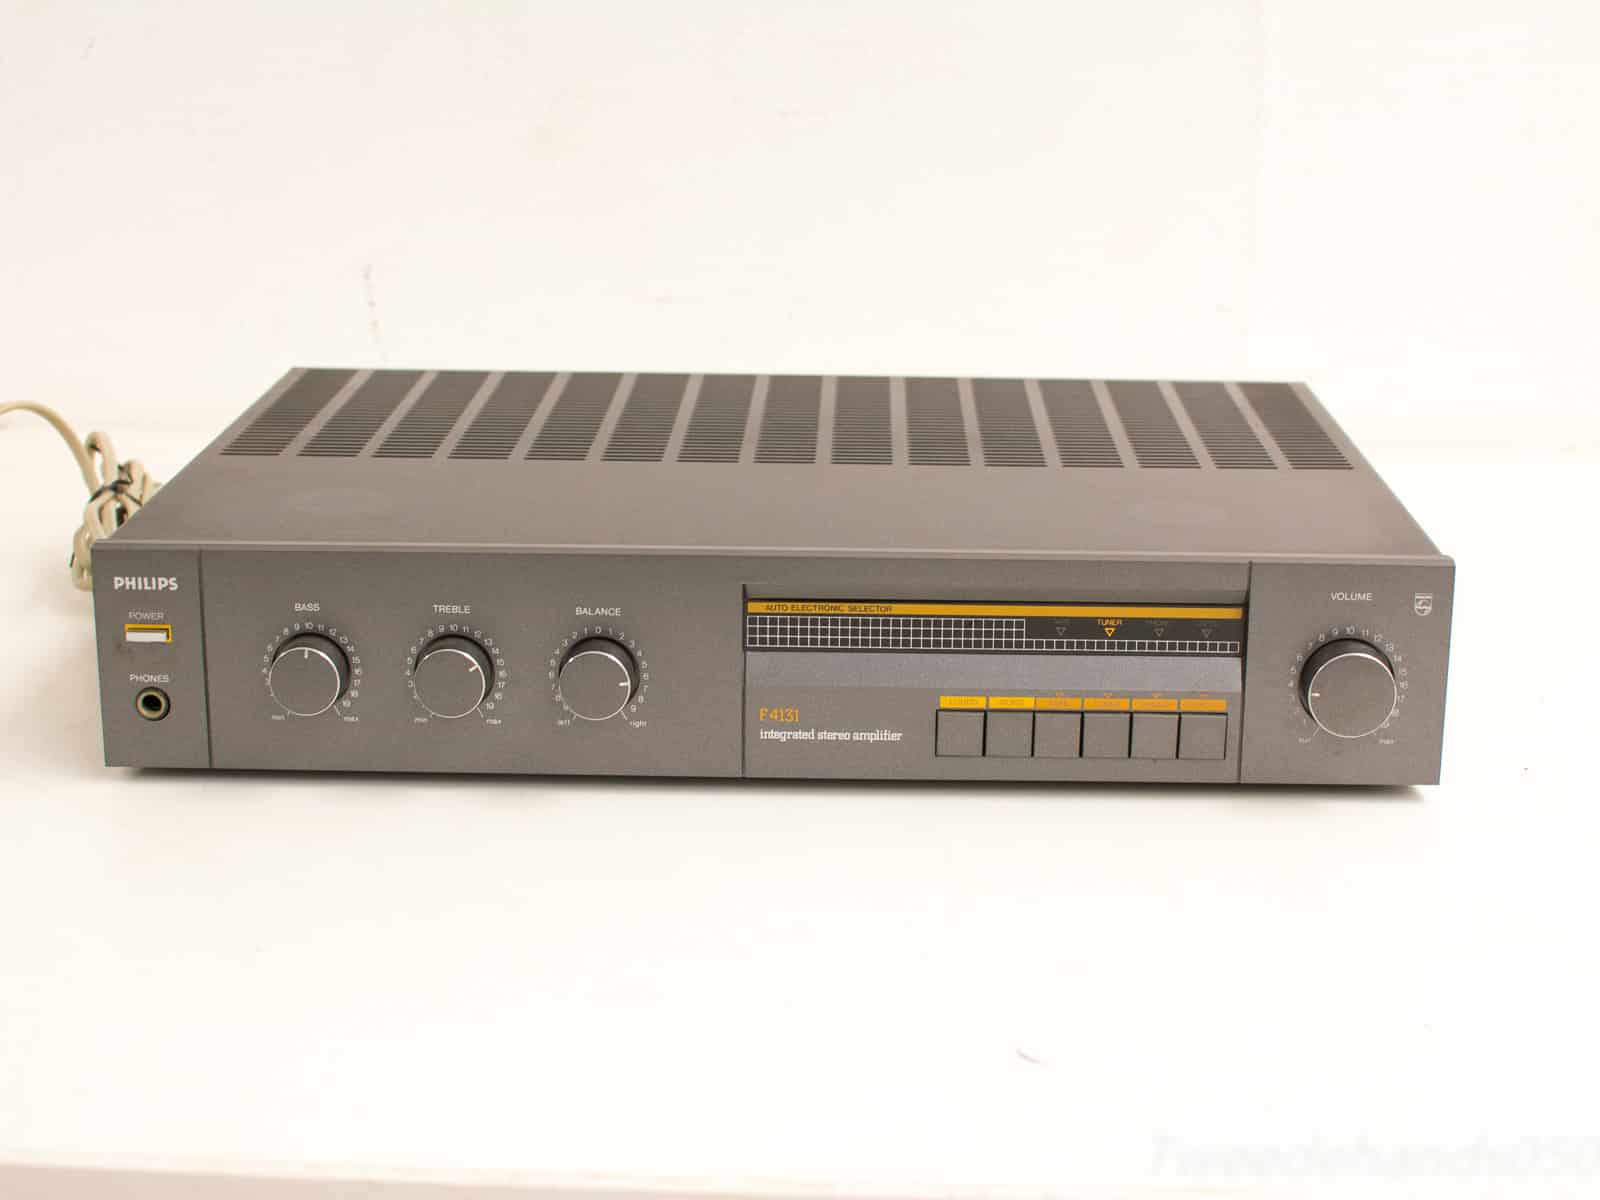 Philips integrate stereo amplifier 25684